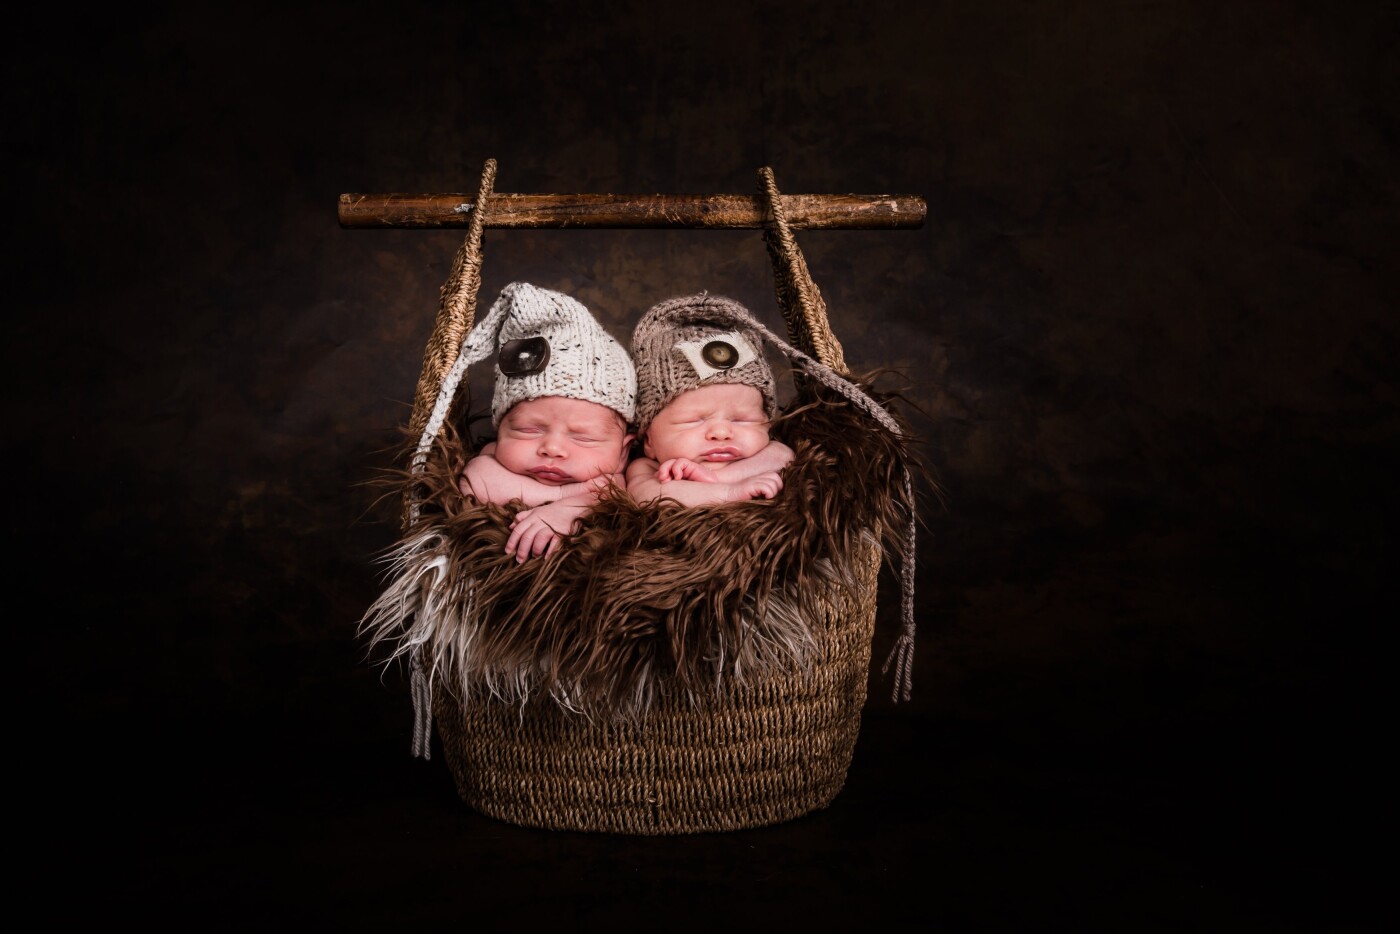 On this photo Lene and Liene are 2 weeks old.<br />
After having 2 gorgeous sons the parents were surprised with not only one but two beautiful girls.The girls did great during the shoot.<br />
The pictures are taken in my studio with studio lighting.